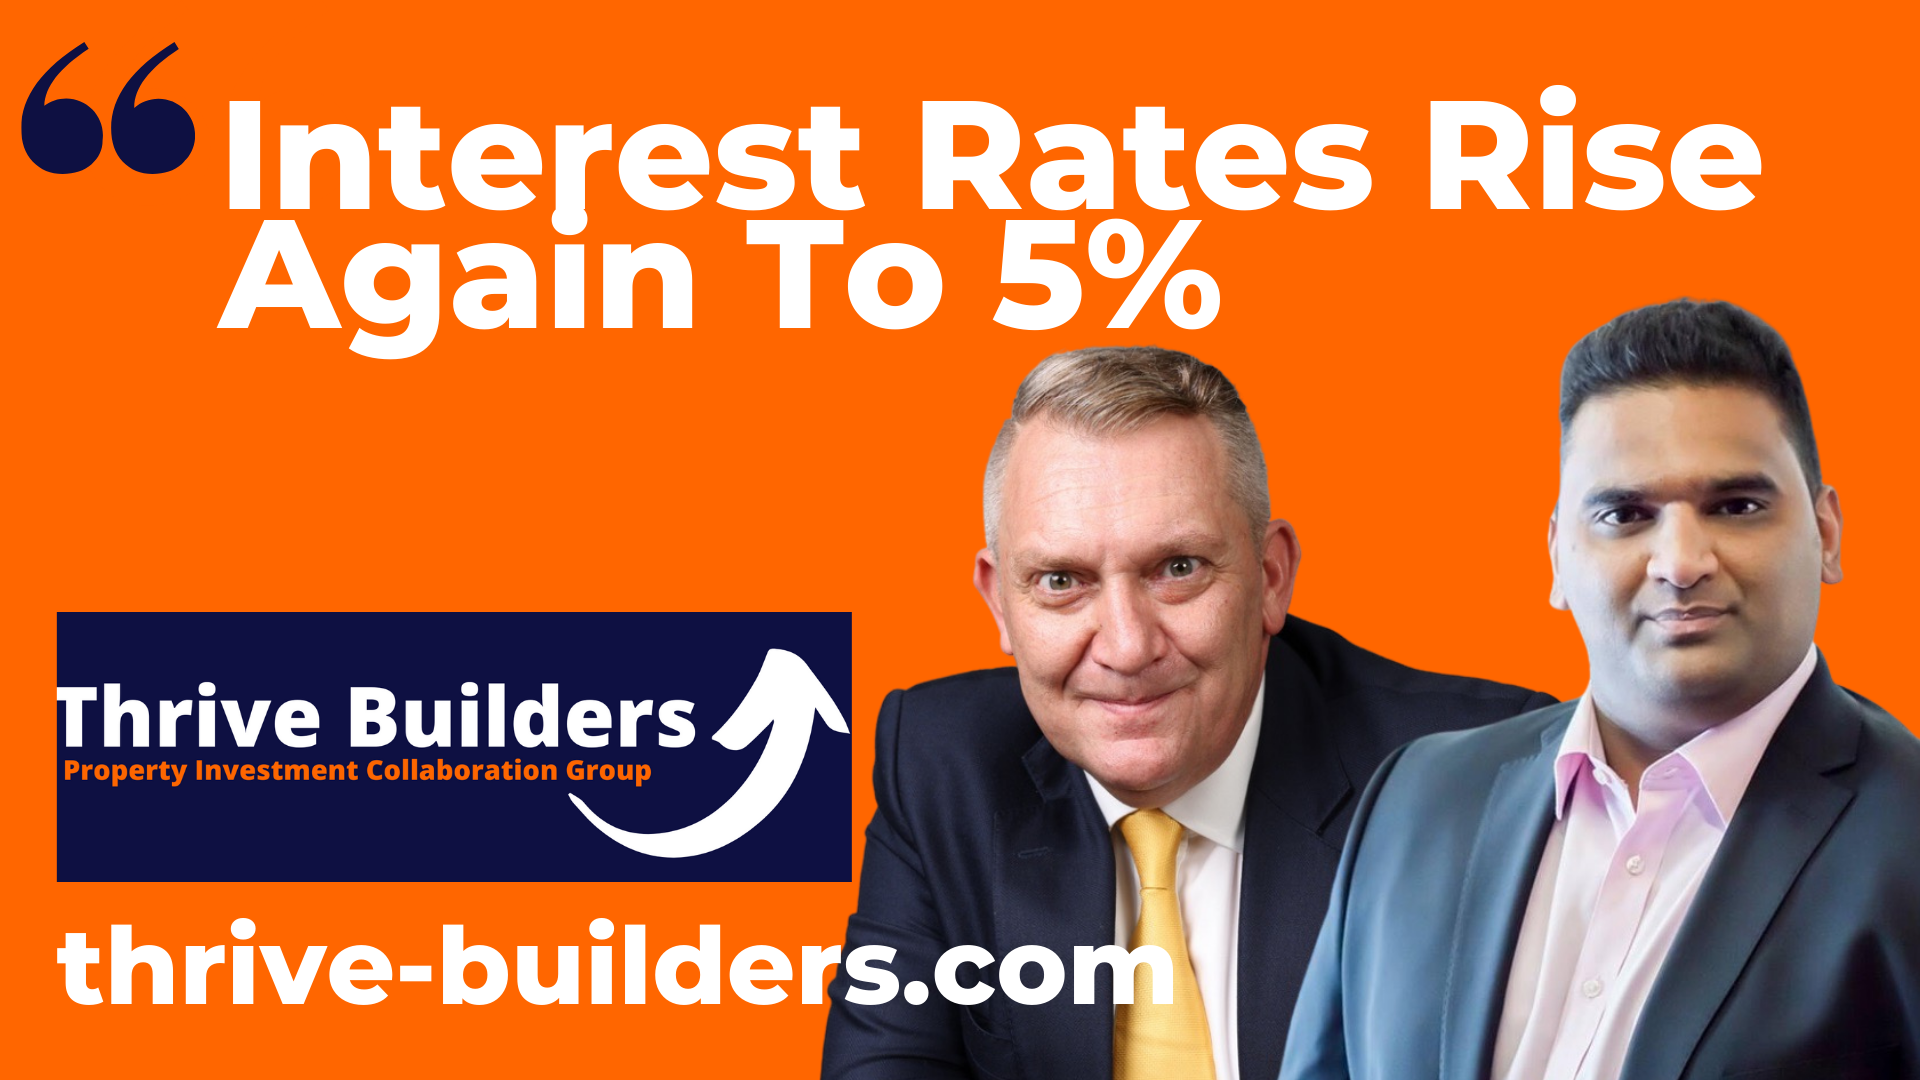 Interest Rates Rise Again To 5%